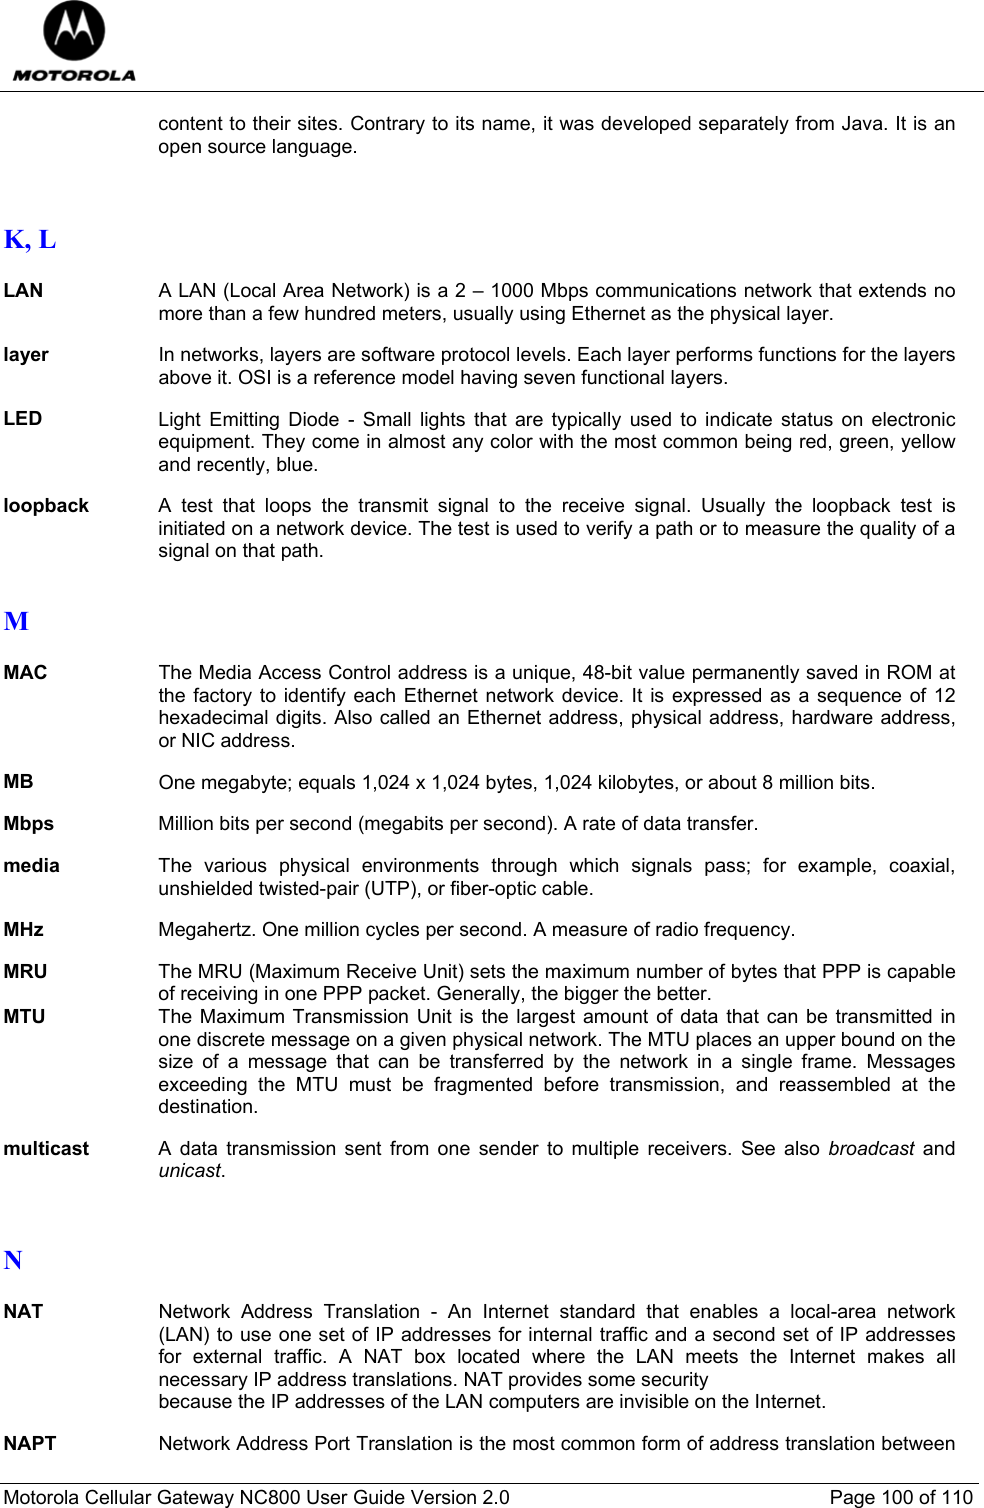  Motorola Cellular Gateway NC800 User Guide Version 2.0     Page 100 of 110  content to their sites. Contrary to its name, it was developed separately from Java. It is an open source language.   K, L  LAN A LAN (Local Area Network) is a 2 – 1000 Mbps communications network that extends no more than a few hundred meters, usually using Ethernet as the physical layer.  layer In networks, layers are software protocol levels. Each layer performs functions for the layers above it. OSI is a reference model having seven functional layers.  LED  Light Emitting Diode - Small lights that are typically used to indicate status on electronic equipment. They come in almost any color with the most common being red, green, yellow and recently, blue.  loopback  A test that loops the transmit signal to the receive signal. Usually the loopback test is initiated on a network device. The test is used to verify a path or to measure the quality of a signal on that path.  M  MAC The Media Access Control address is a unique, 48-bit value permanently saved in ROM at the factory to identify each Ethernet network device. It is expressed as a sequence of 12 hexadecimal digits. Also called an Ethernet address, physical address, hardware address, or NIC address.  MB One megabyte; equals 1,024 x 1,024 bytes, 1,024 kilobytes, or about 8 million bits.  Mbps  Million bits per second (megabits per second). A rate of data transfer.  media  The various physical environments through which signals pass; for example, coaxial, unshielded twisted-pair (UTP), or fiber-optic cable.  MHz  Megahertz. One million cycles per second. A measure of radio frequency.  MRU  The MRU (Maximum Receive Unit) sets the maximum number of bytes that PPP is capable of receiving in one PPP packet. Generally, the bigger the better. MTU  The Maximum Transmission Unit is the largest amount of data that can be transmitted in one discrete message on a given physical network. The MTU places an upper bound on the size of a message that can be transferred by the network in a single frame. Messages exceeding the MTU must be fragmented before transmission, and reassembled at the destination.  multicast  A data transmission sent from one sender to multiple receivers. See also broadcast and unicast.   N  NAT Network Address Translation - An Internet standard that enables a local-area network (LAN) to use one set of IP addresses for internal traffic and a second set of IP addresses for external traffic. A NAT box located where the LAN meets the Internet makes all necessary IP address translations. NAT provides some security  because the IP addresses of the LAN computers are invisible on the Internet.  NAPT Network Address Port Translation is the most common form of address translation between 